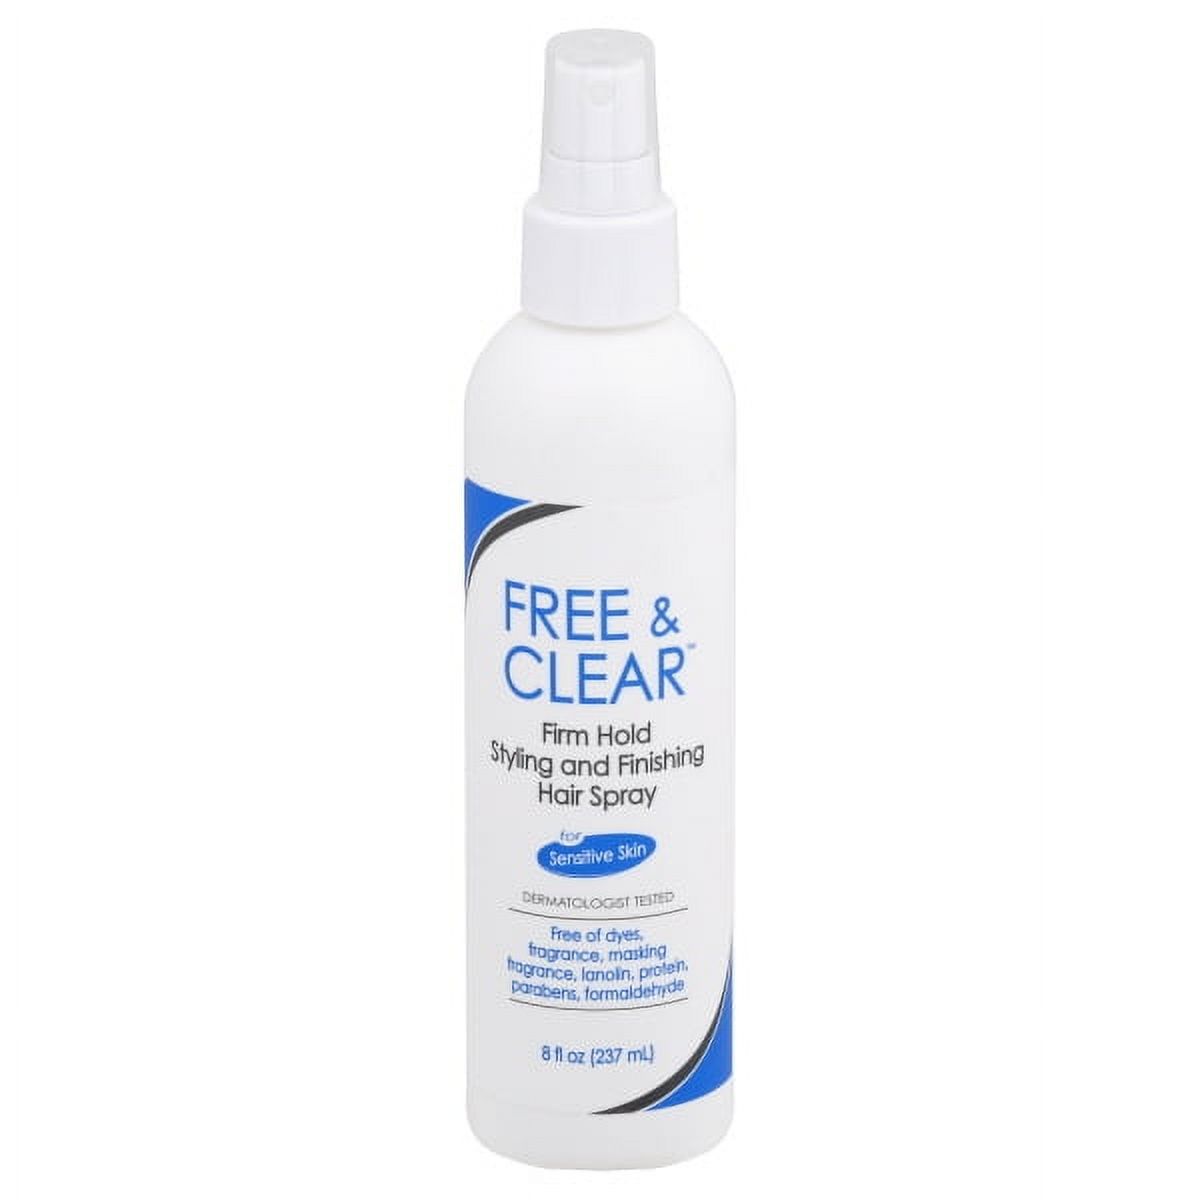 Free & Clear Firm Hold Styling & Finishing Hair Spray, 8 Fl. Oz. - image 1 of 2